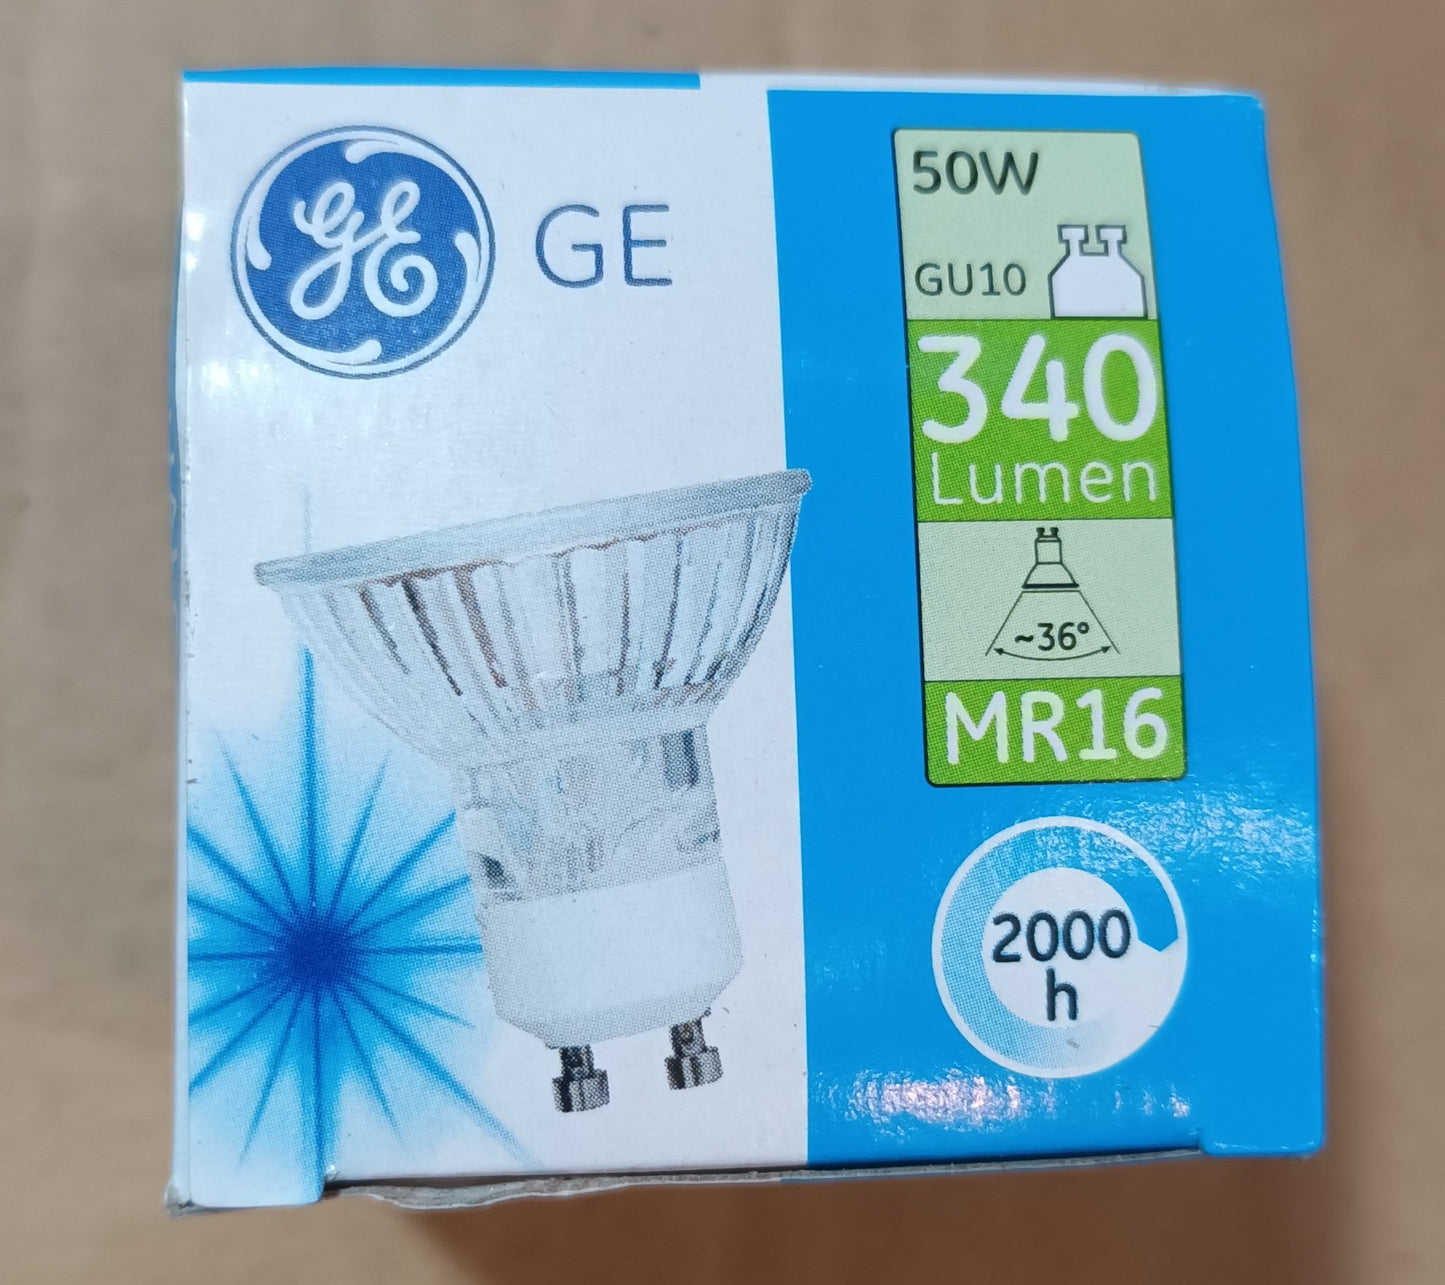 GU10 50Ws 2000hrs life Dimmable 28OOK / warm white 36</p>° by GE